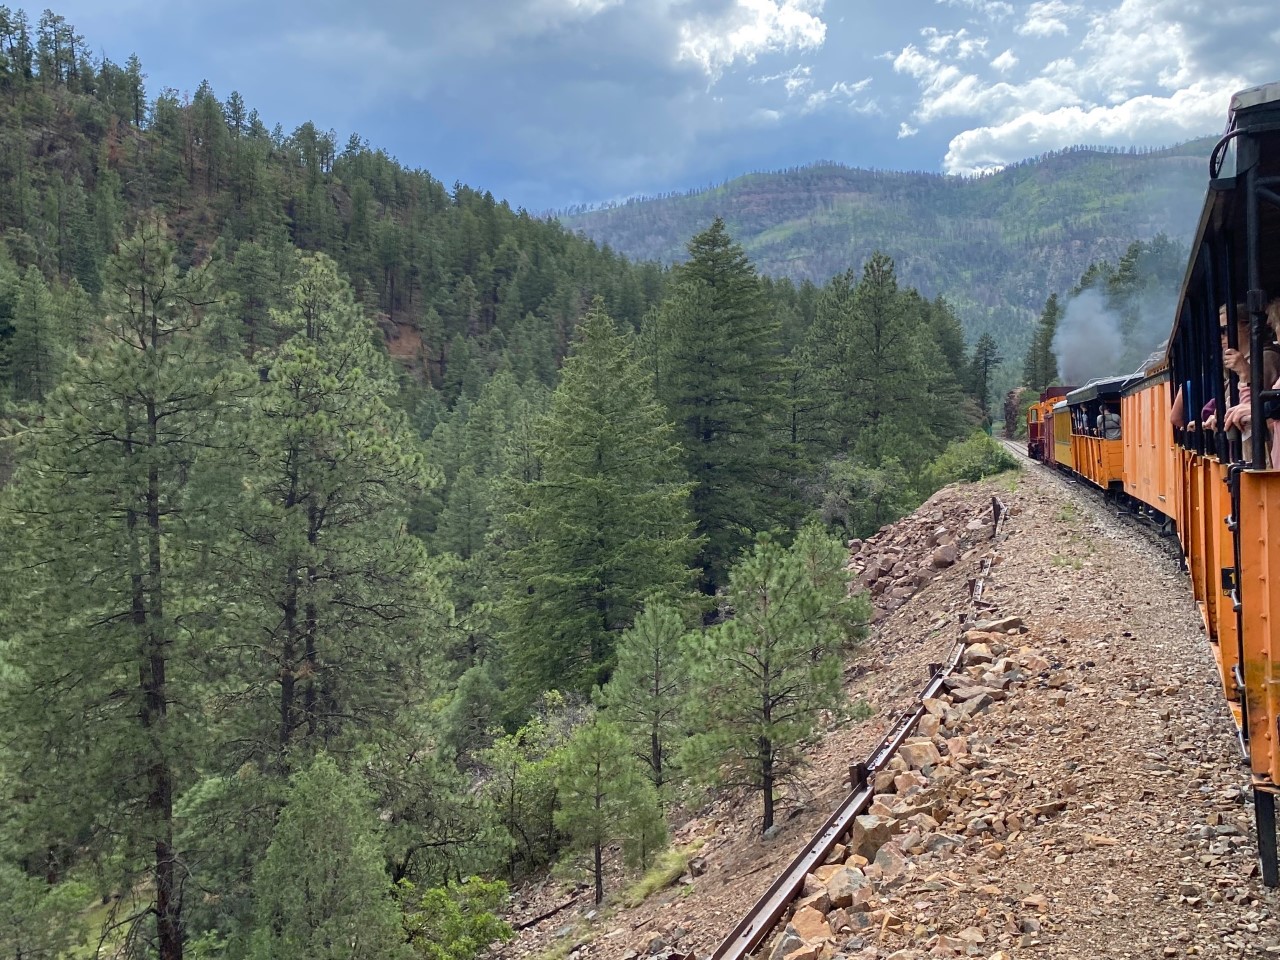 The train takes us through forests as it approaches Durango.